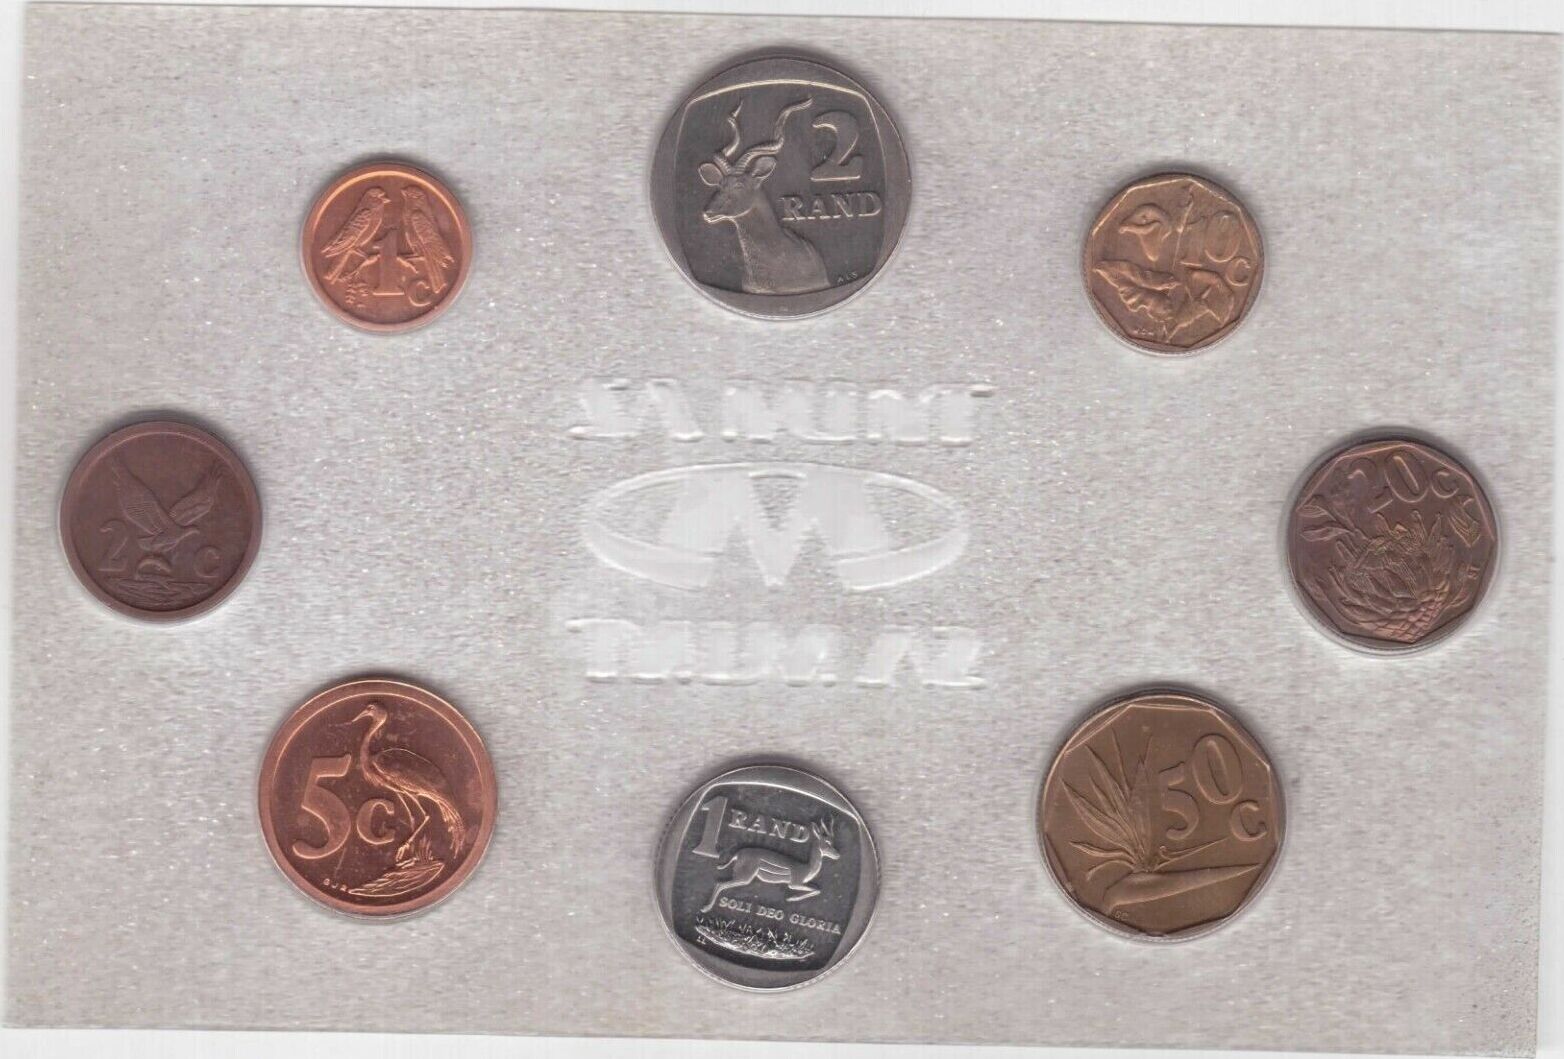 Cent Pw South Africa Rare Extremely Mint Dif Coins Set Rand Botha Ma Shops